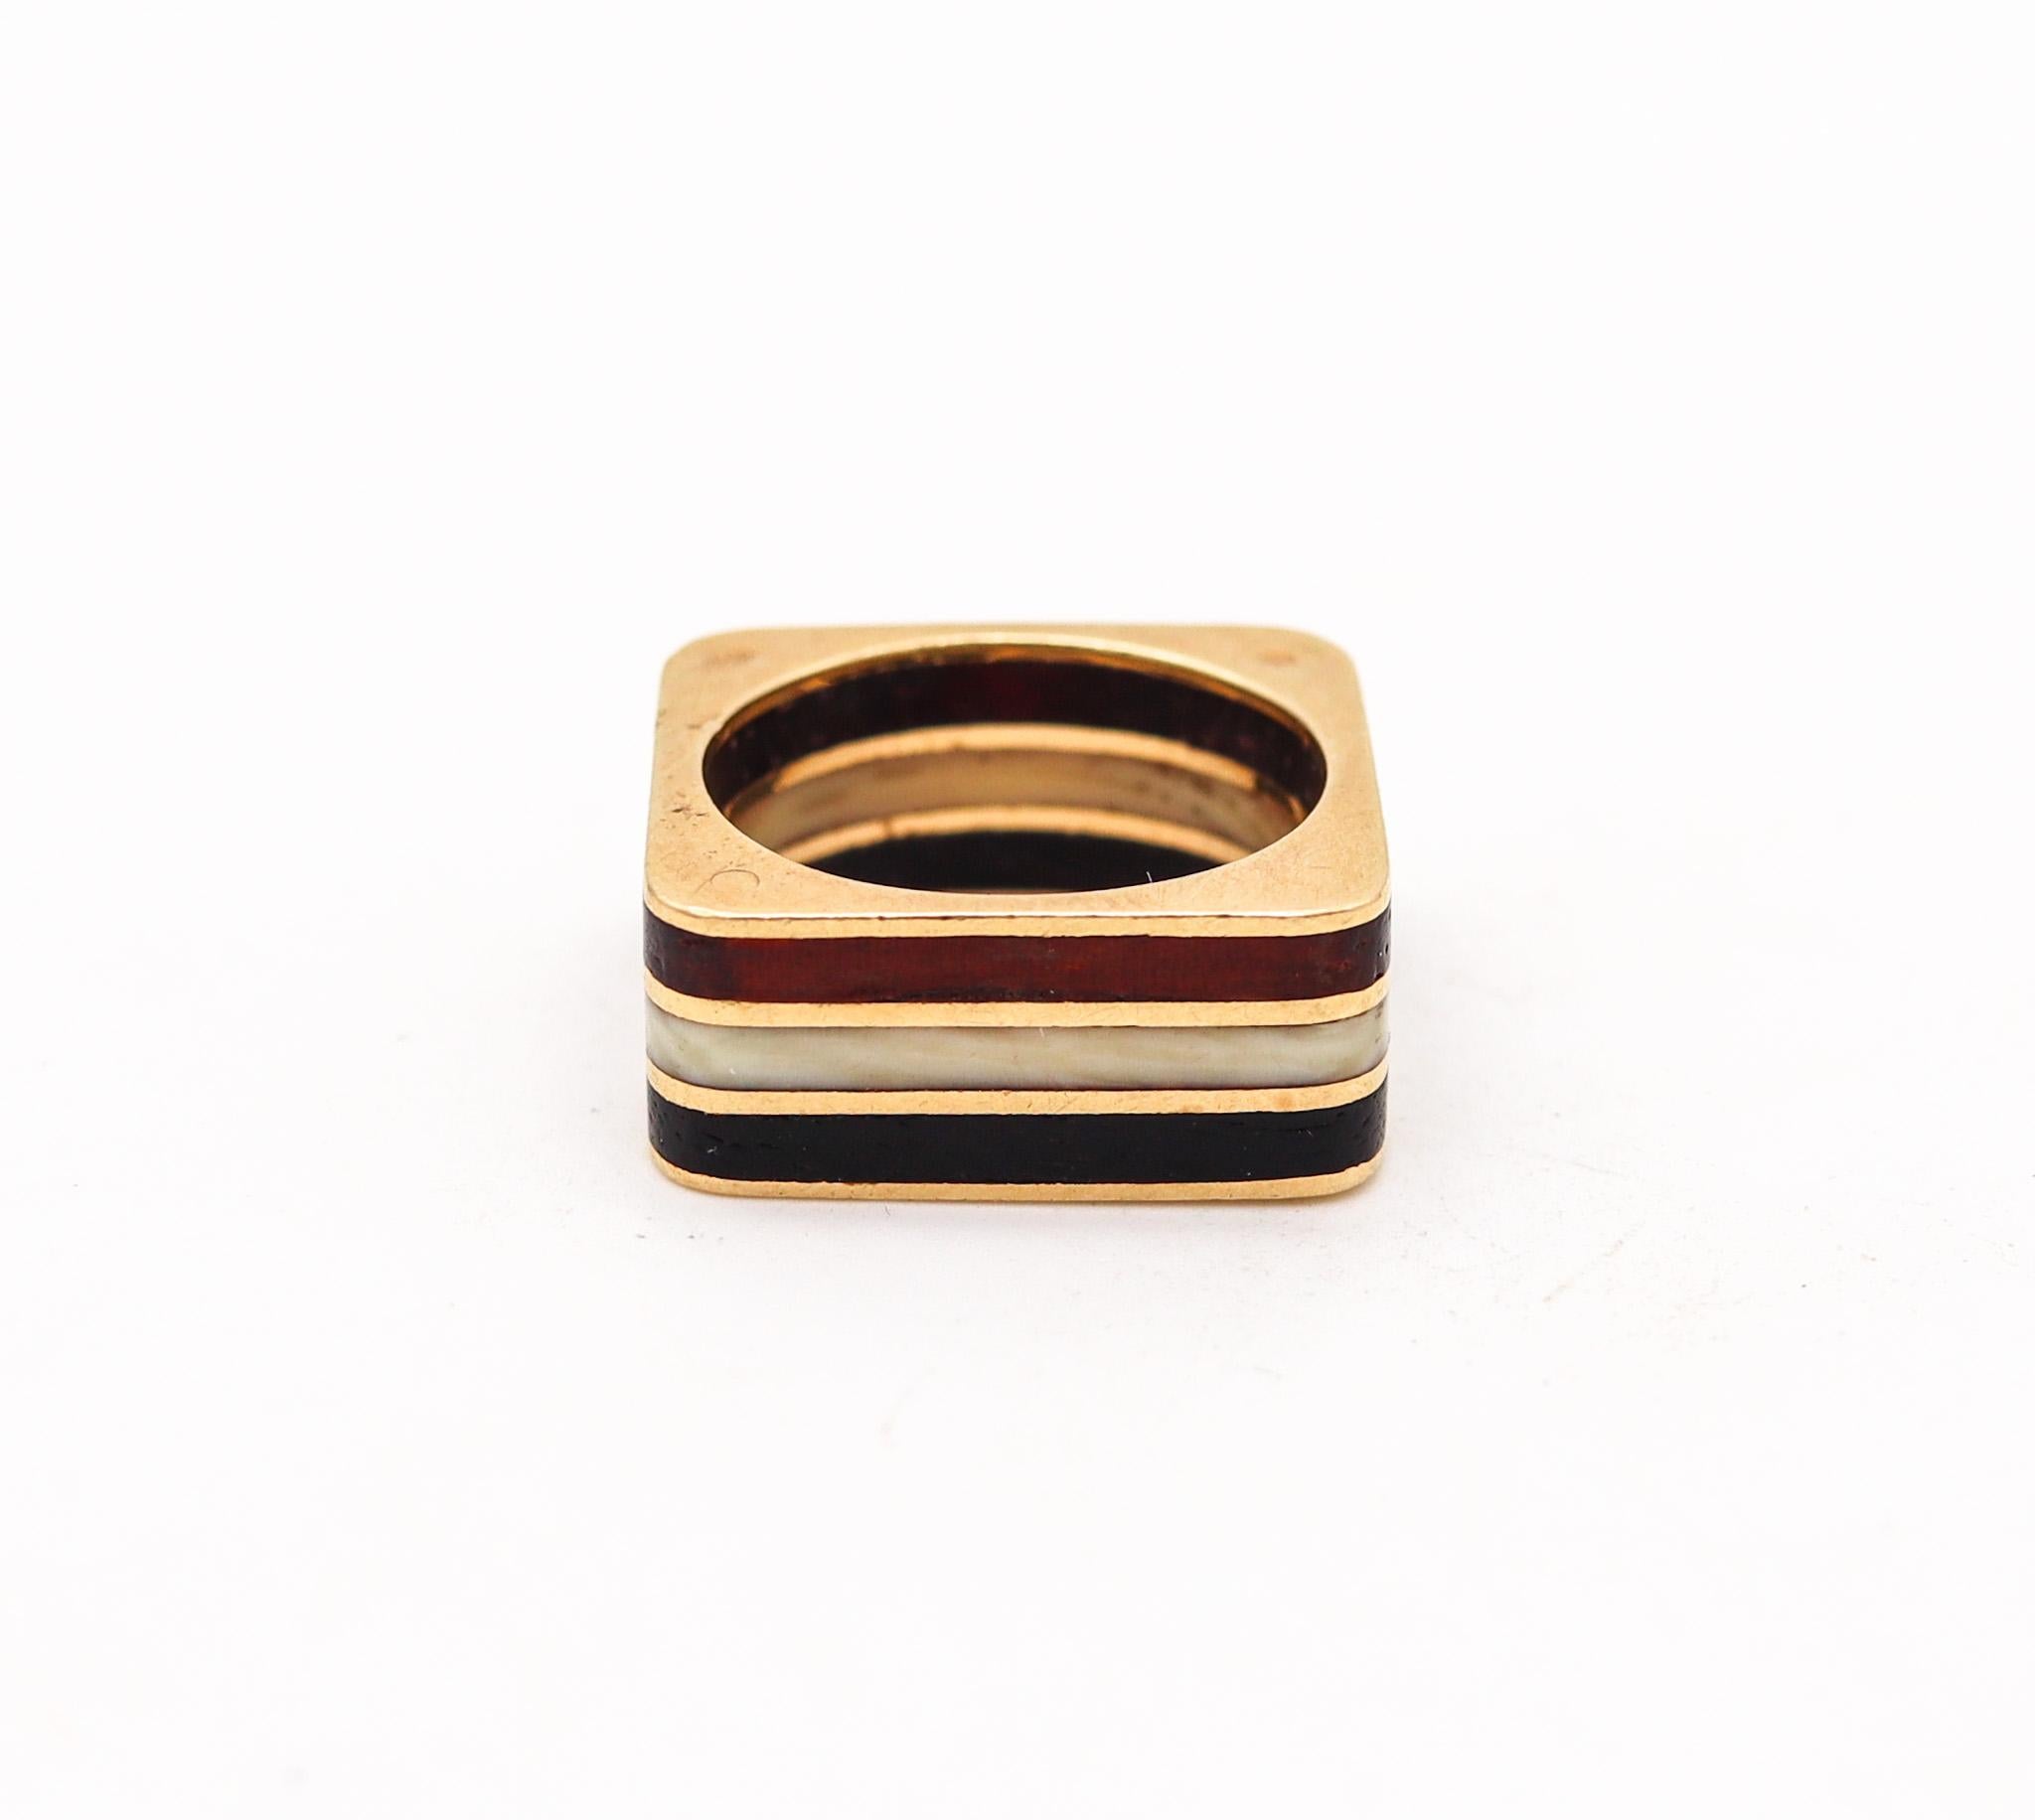 Squared ring designed by Octavio Sarda Palau.

Fabulous architectural geometric ring, created in Barcelona Spain by the artist goldsmith Octavio Sarda Palau, back in the 1970. This unusual squared ring has been made with Bauhaus parameters of the